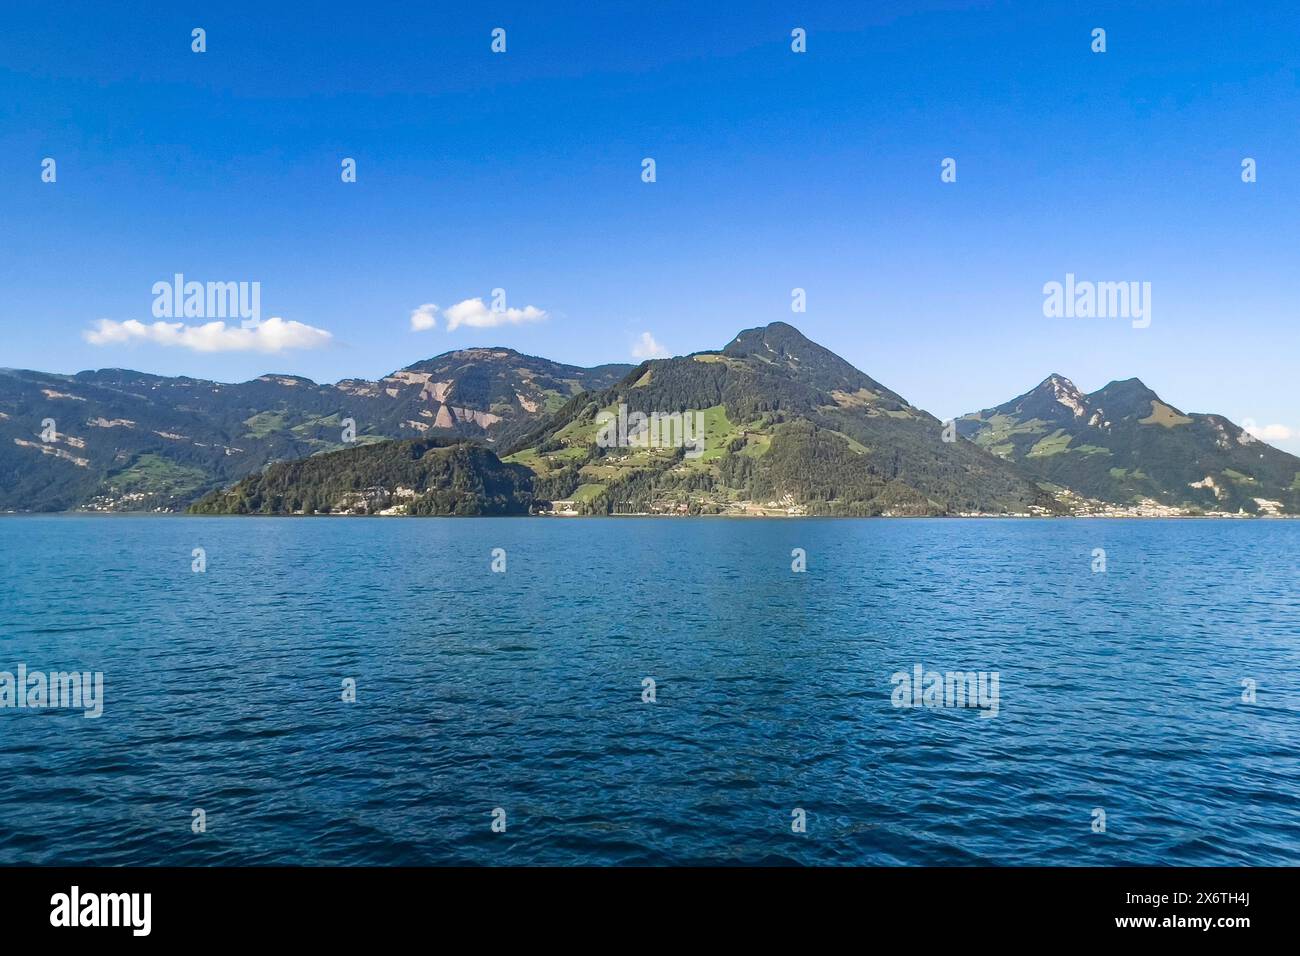 Calm lake under a clear blue sky with picturesque mountains in the background, Beckenried, Nidwalden, Switzerland Stock Photo